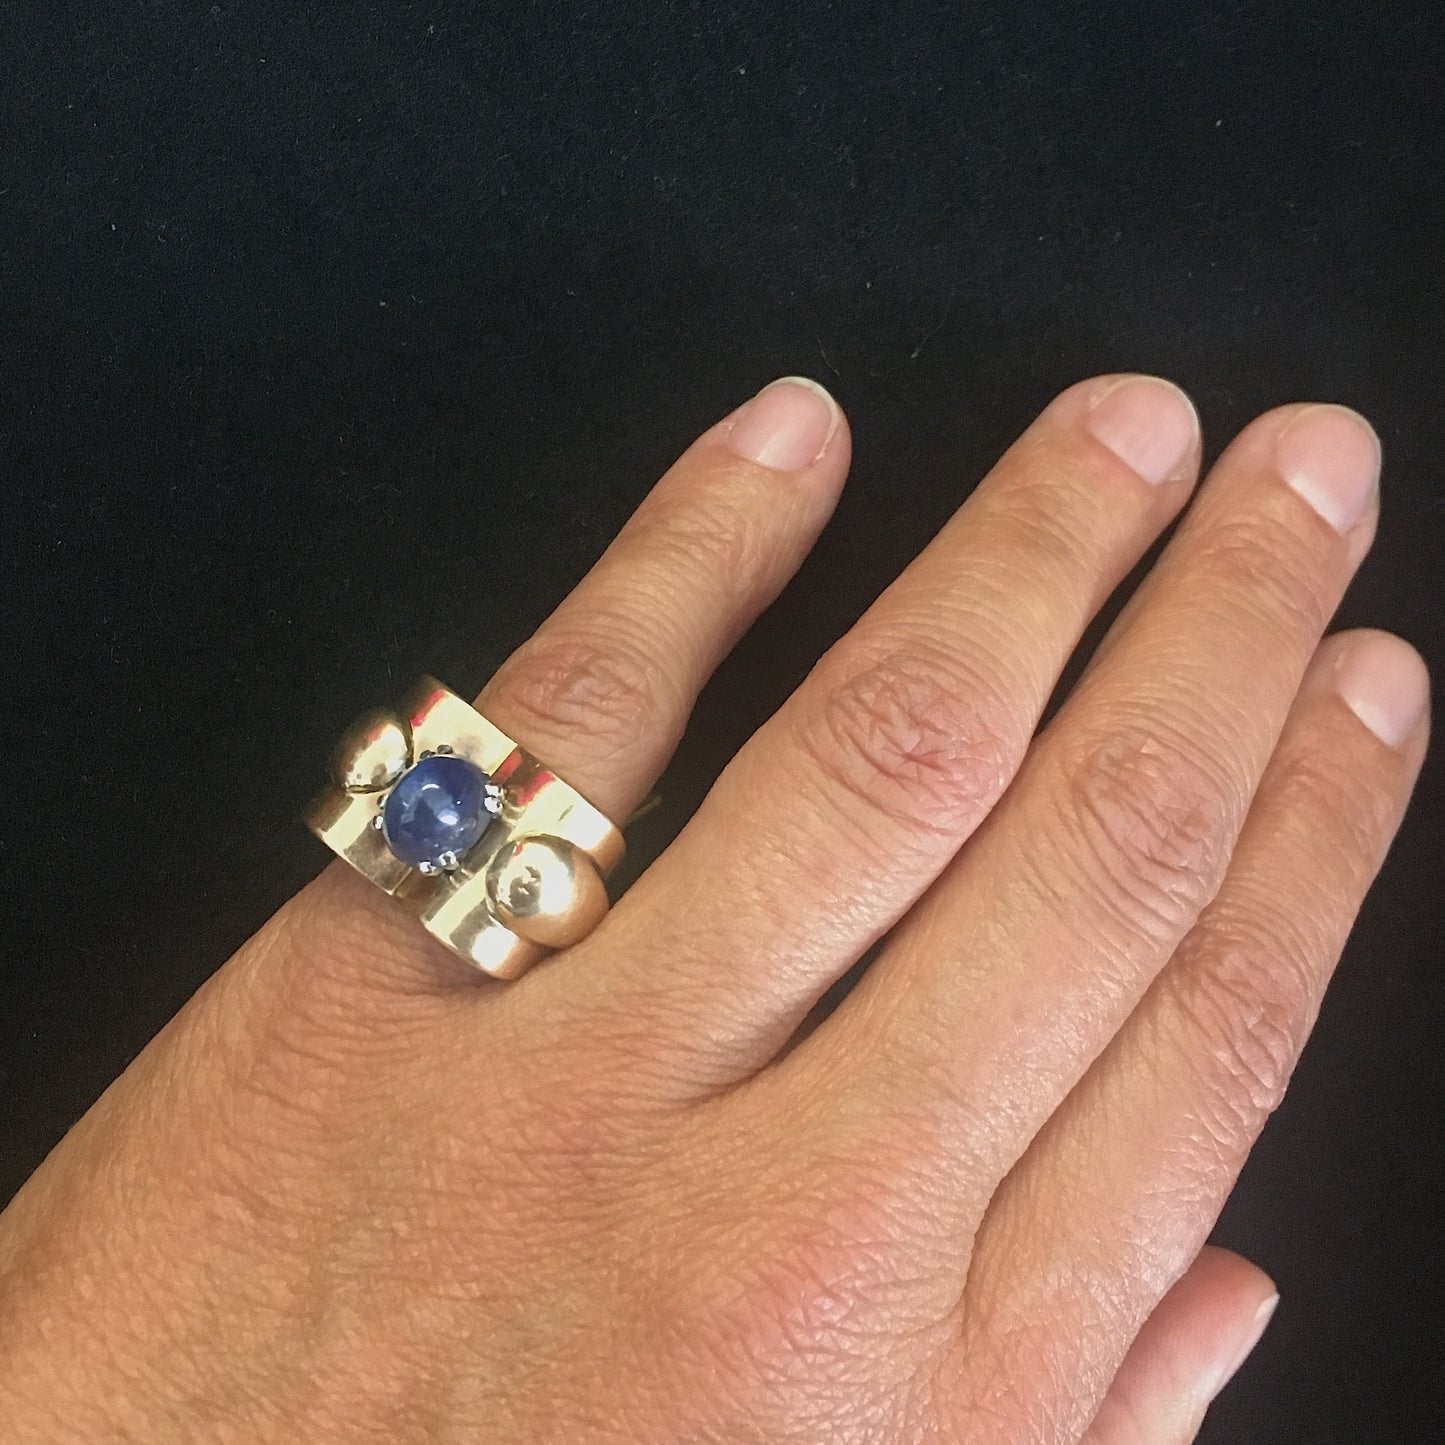 1950s 18KT Yellow Gold Sapphire Ring on finger